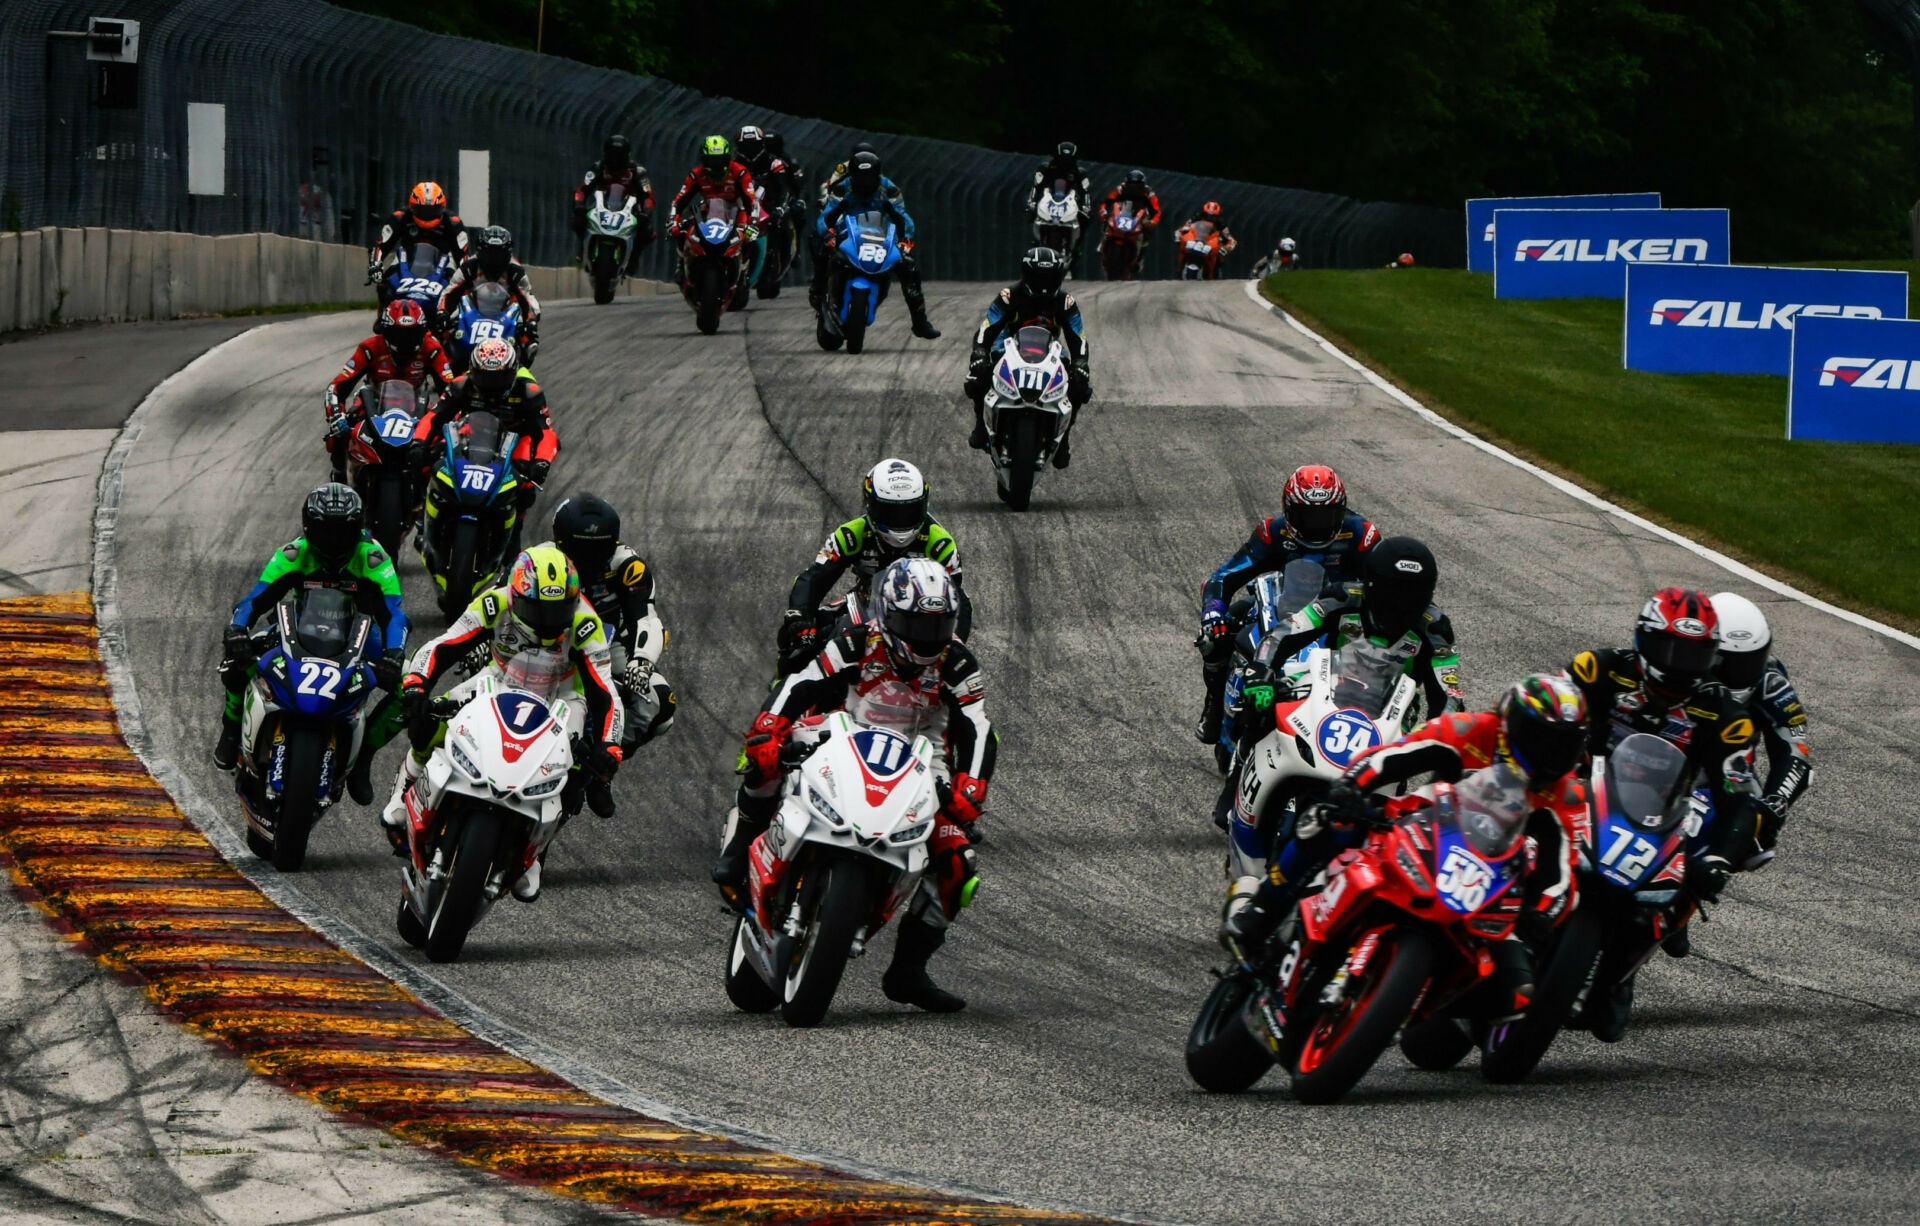 Action from a MotoAmerica Twins Cup race at Road America in 2022. Photo by Sara Chappell Photos, courtesy CSBK.